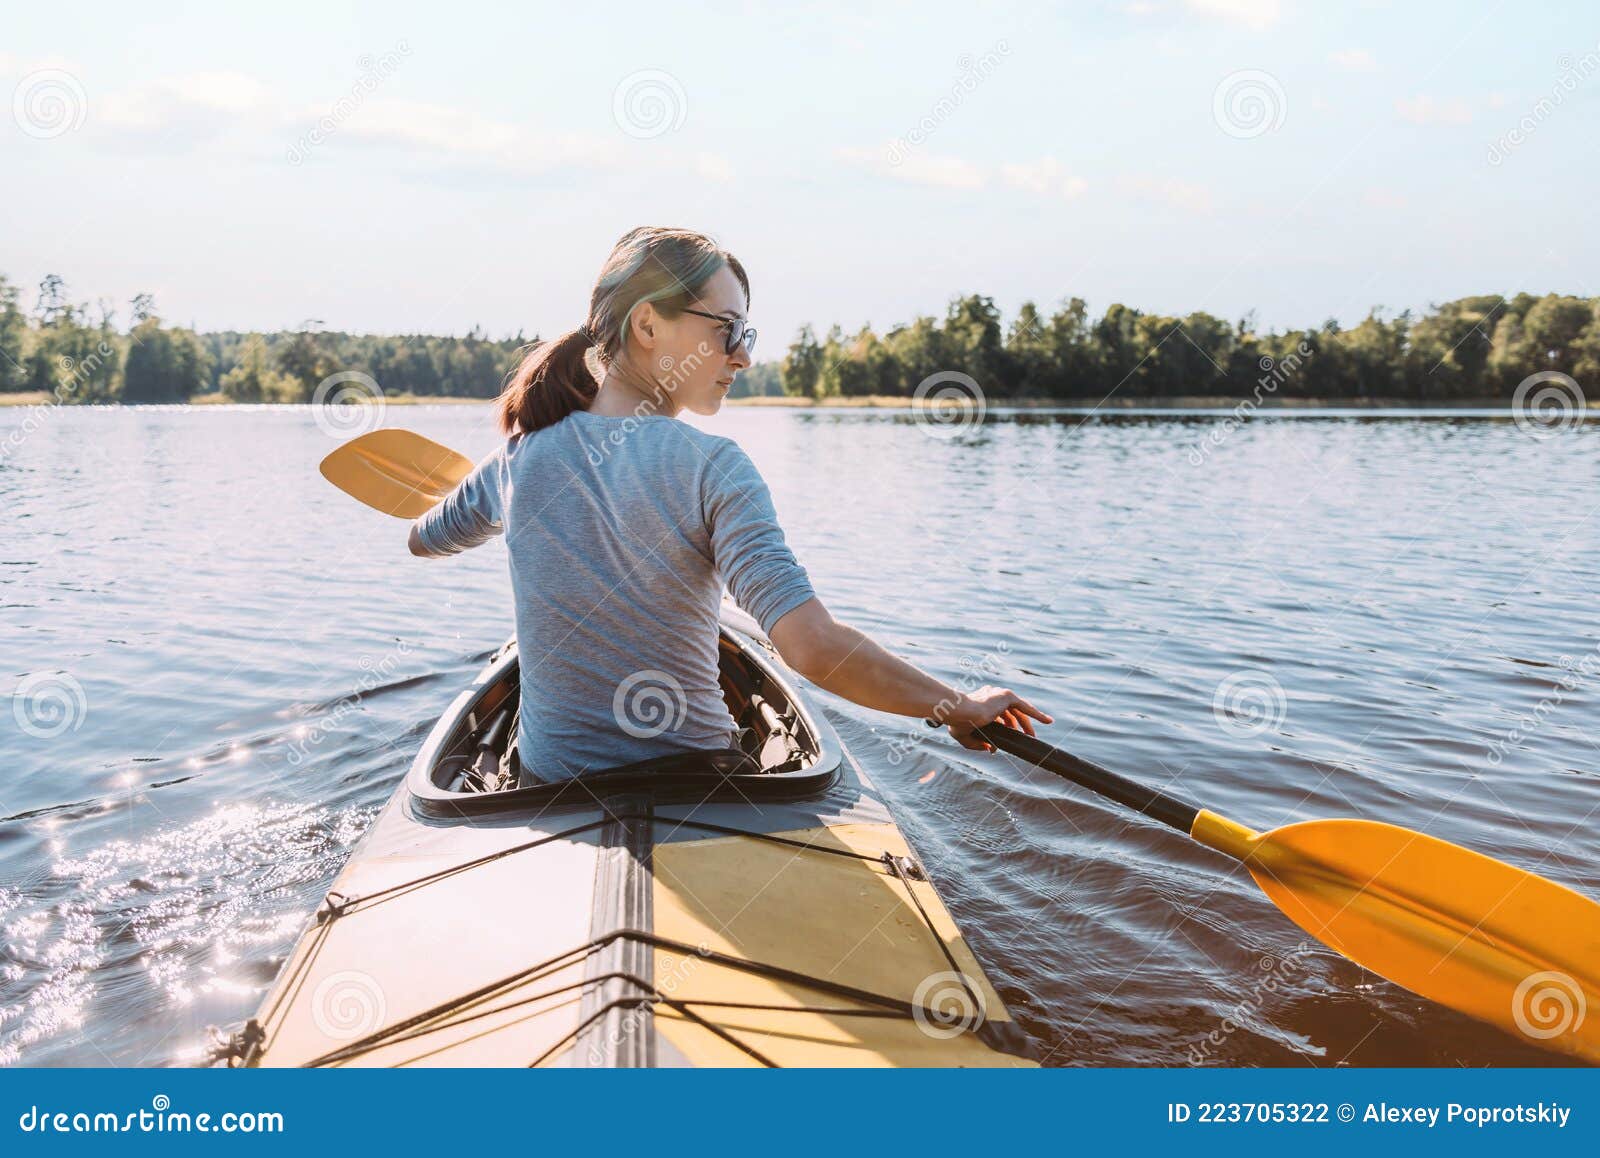 View from the Back, a Woman on a Boat. Stock Photo - Image of lifestyle ...